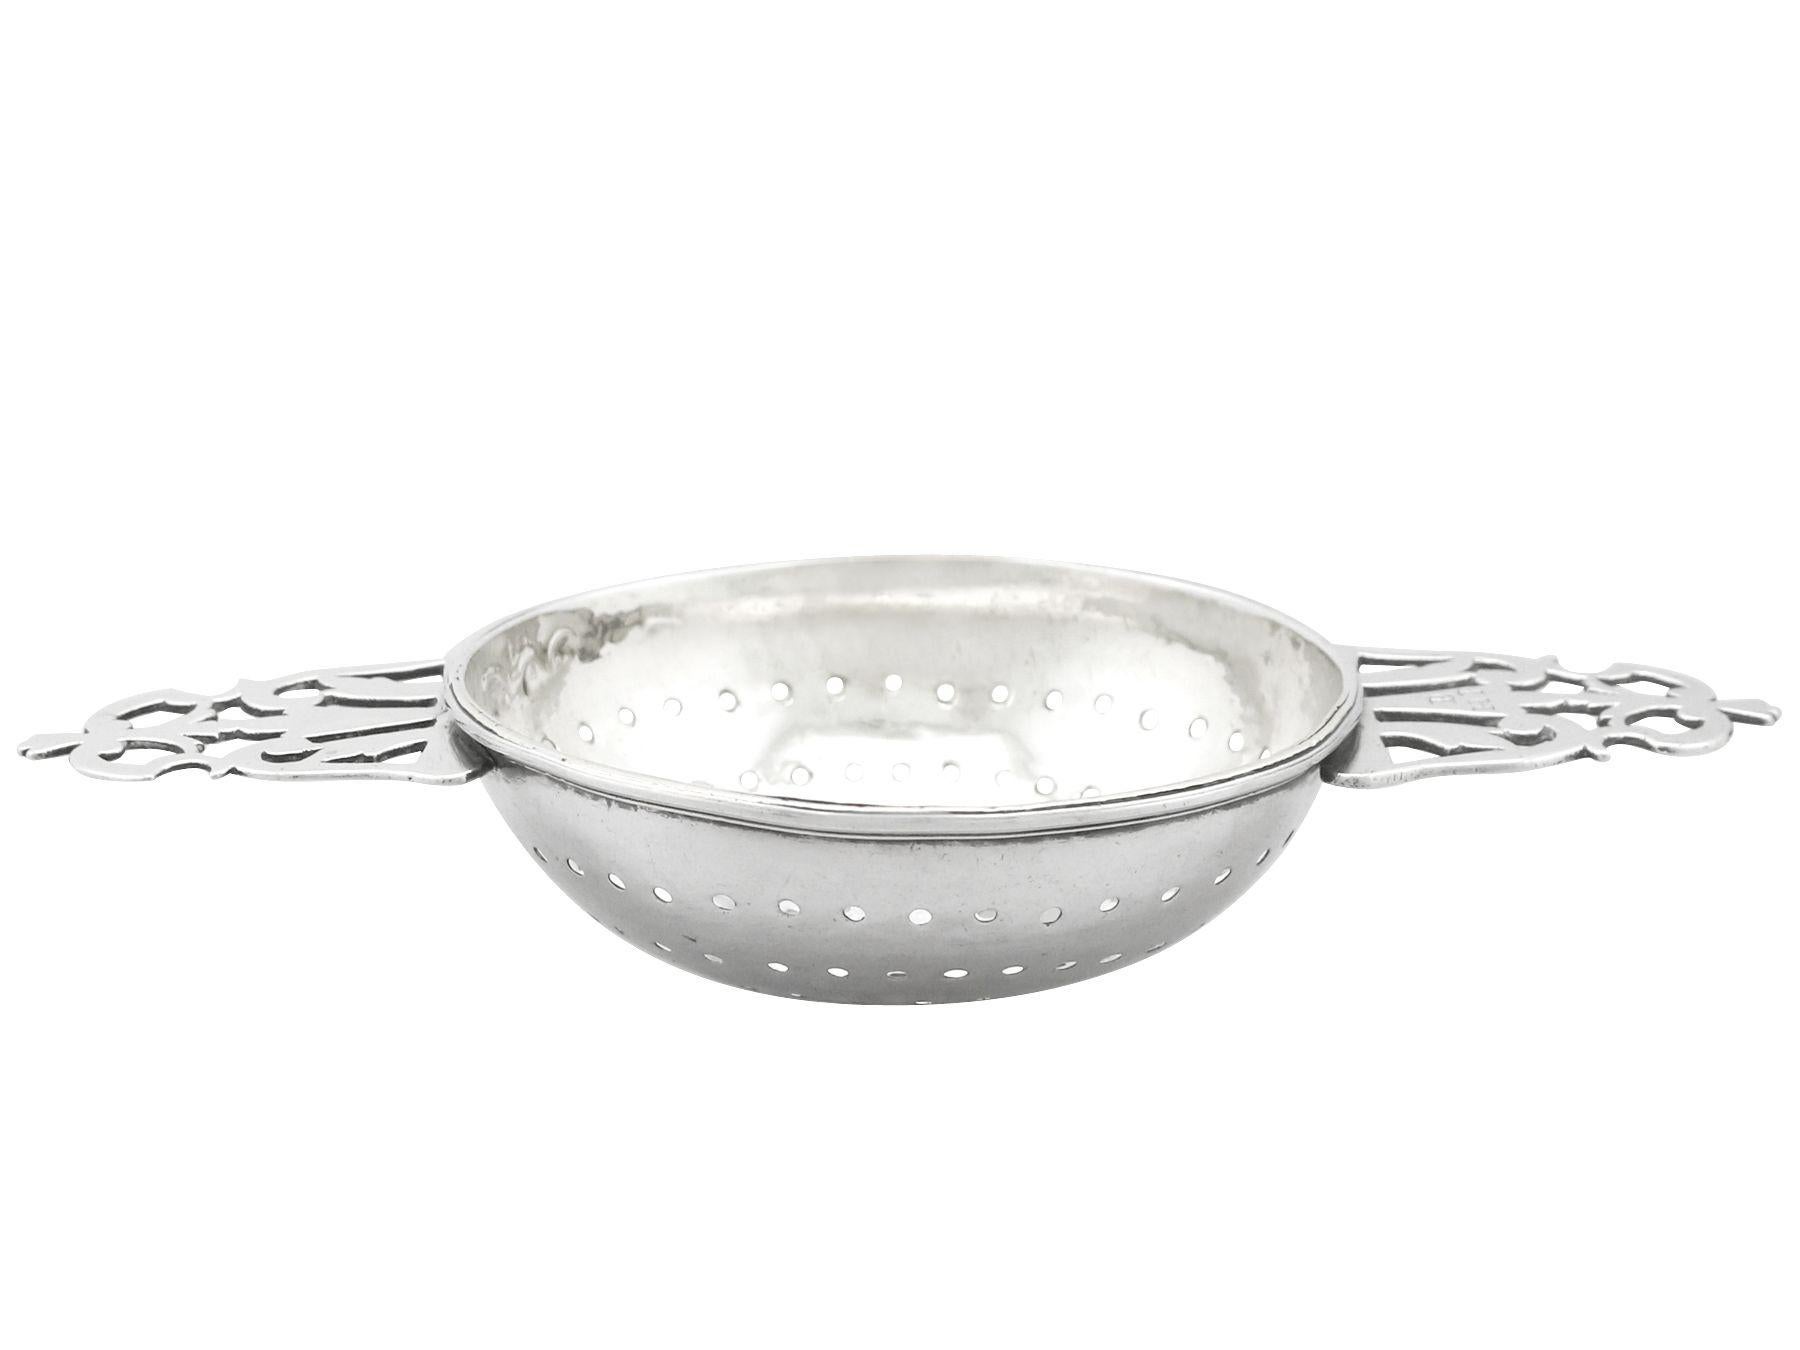 An exceptional, fine and impressive antique Georgian English Britannia standard silver lemon strainer, an addition to our range of collectable, 18th century silverware

This exceptional antique George I English Britannia standard silver lemon